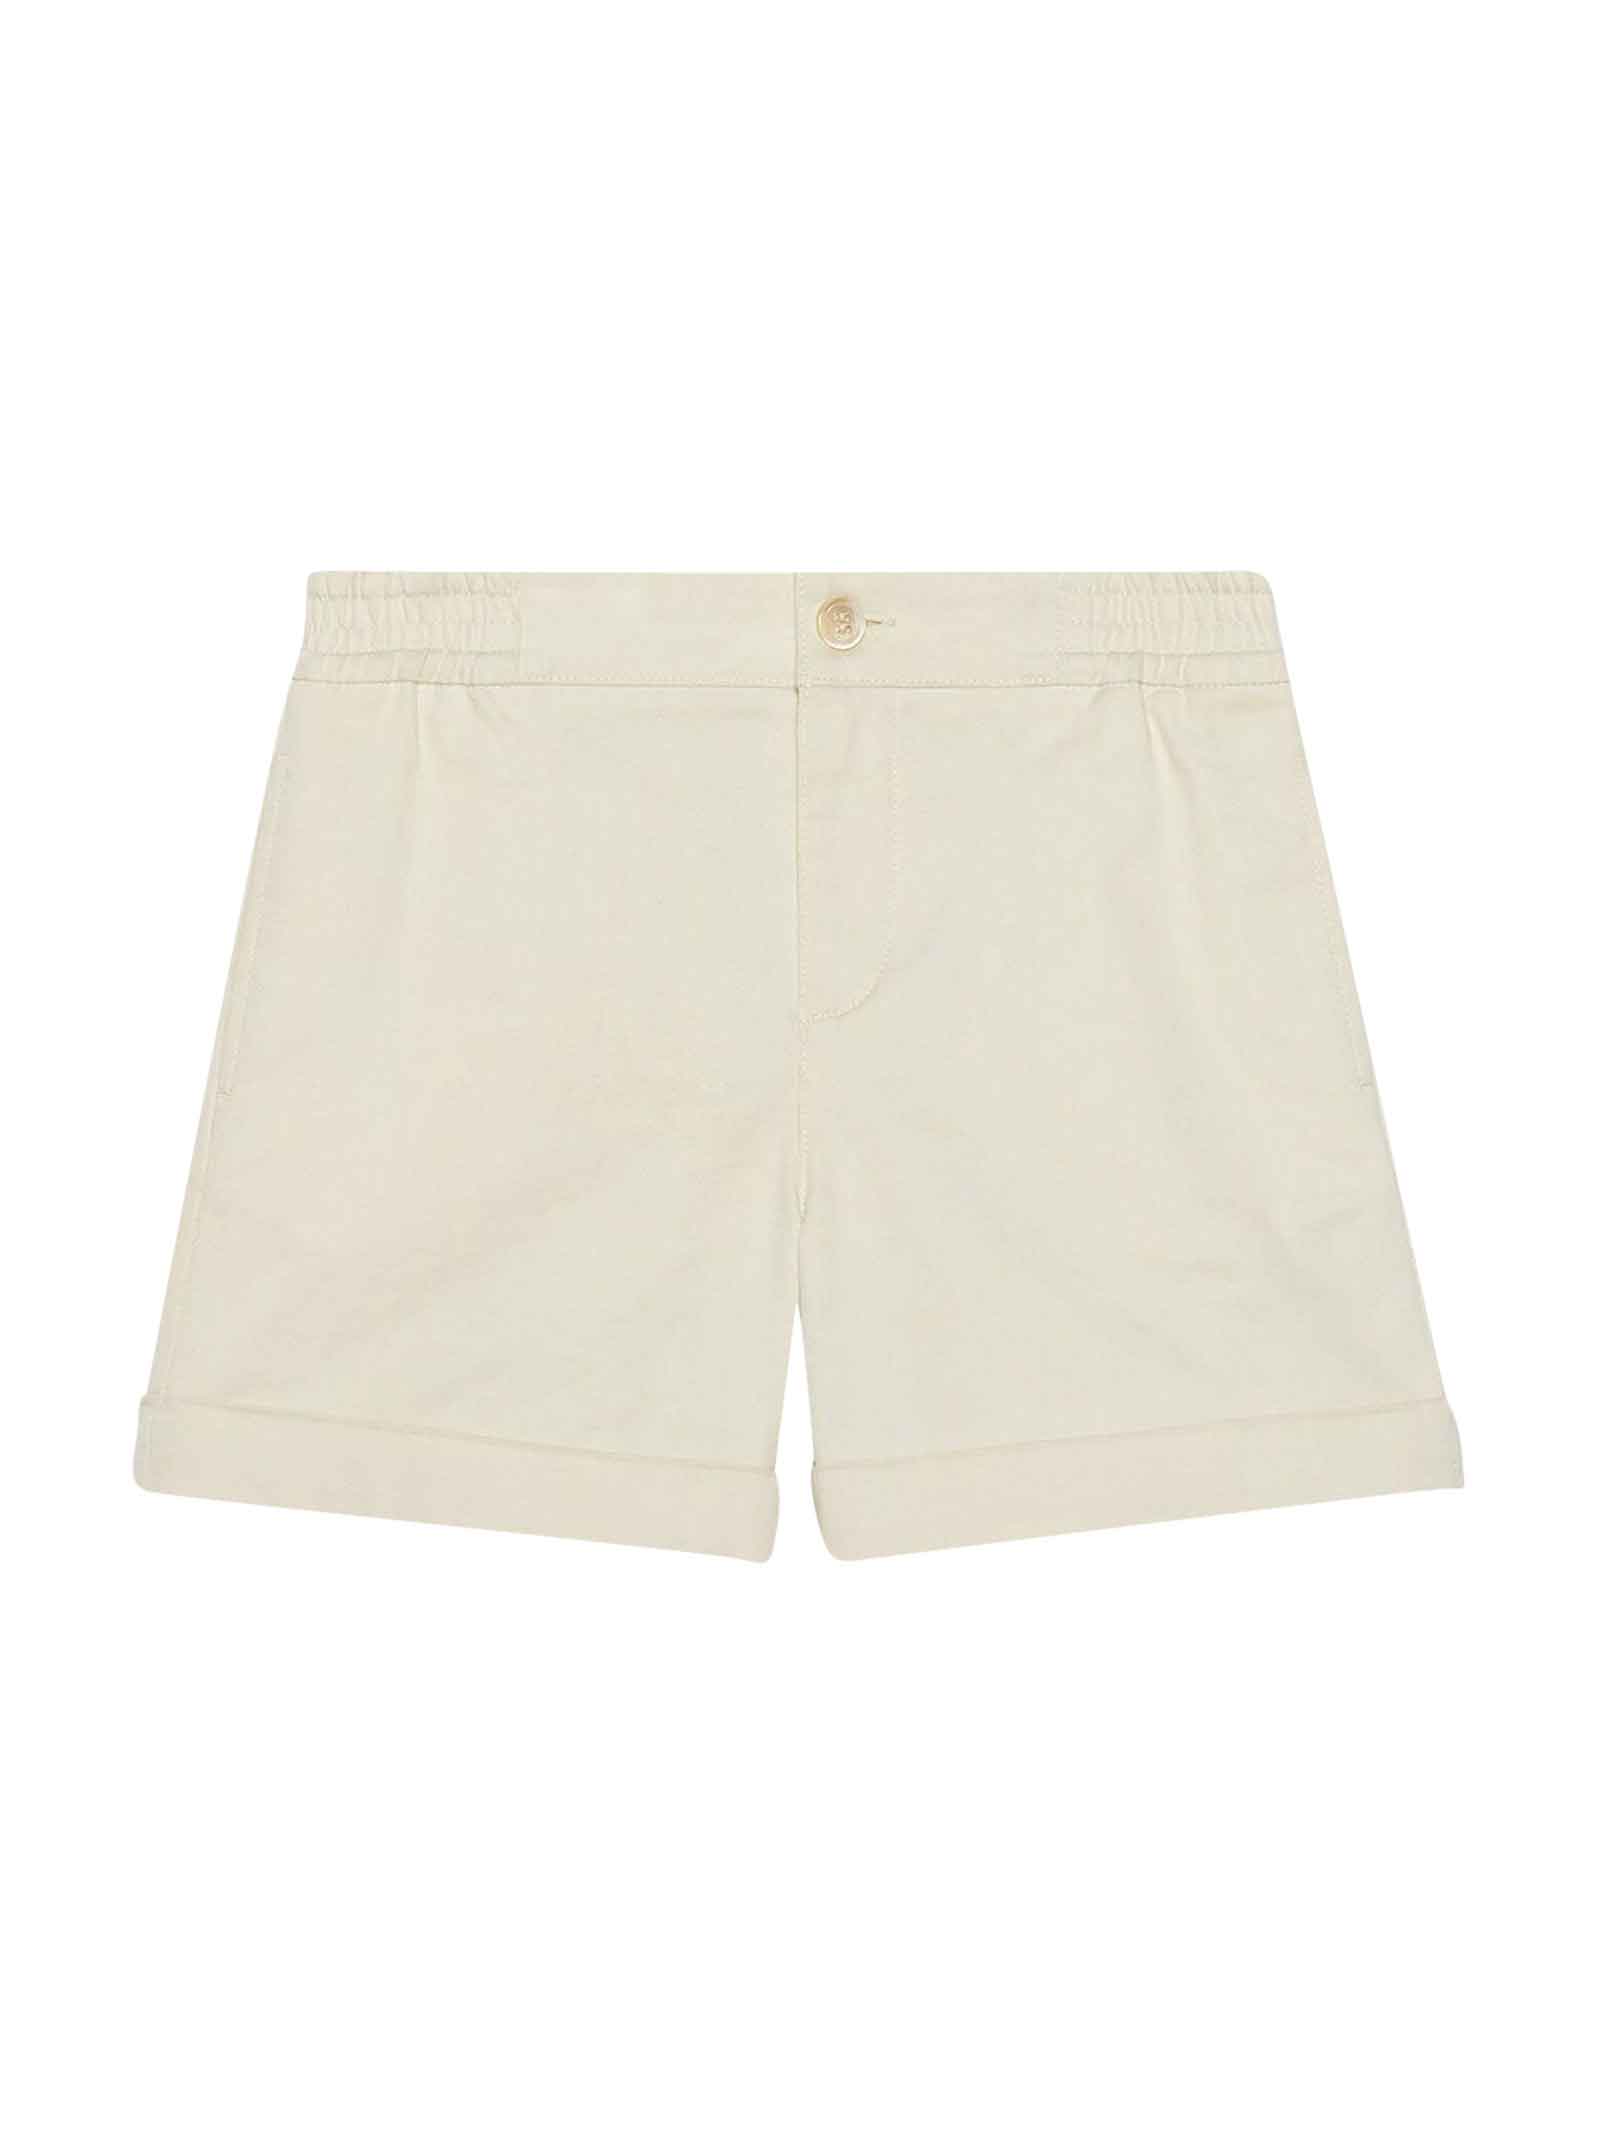 GUCCI WHITE SHORTS WITH REAR LOGO,11277195